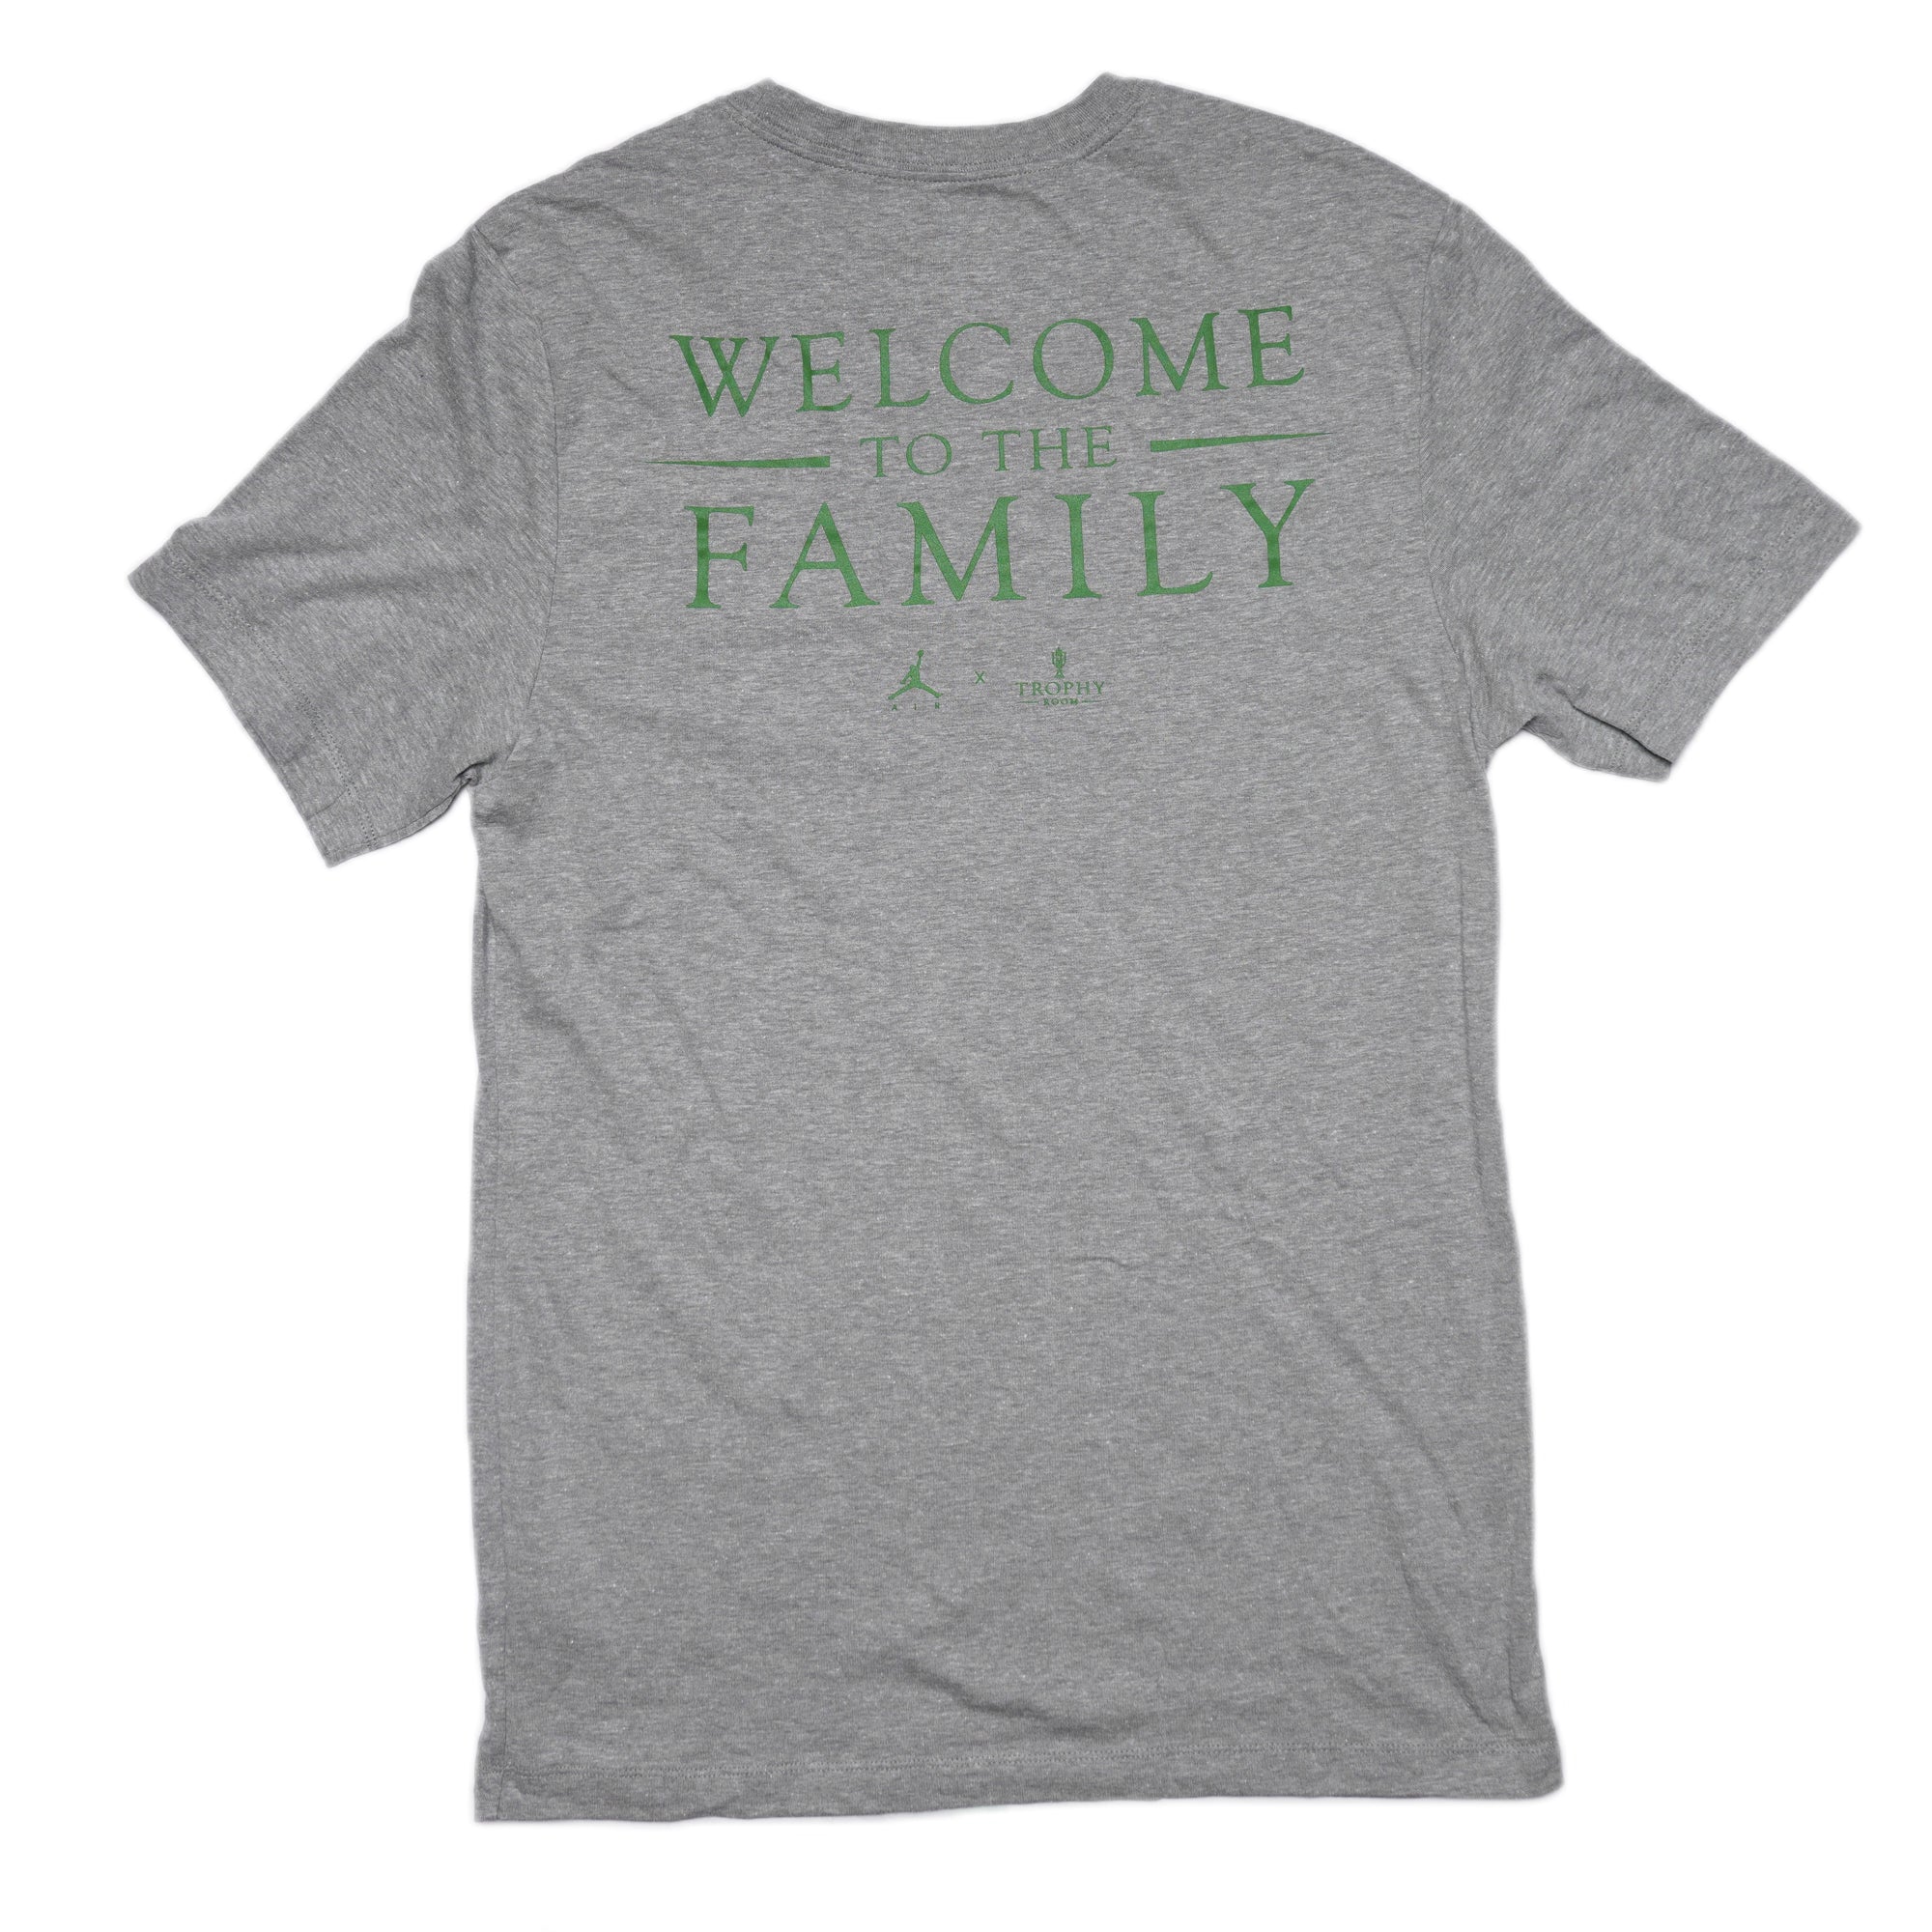 Trophy Room MJ 'Welcome To The Family' Grey Tee